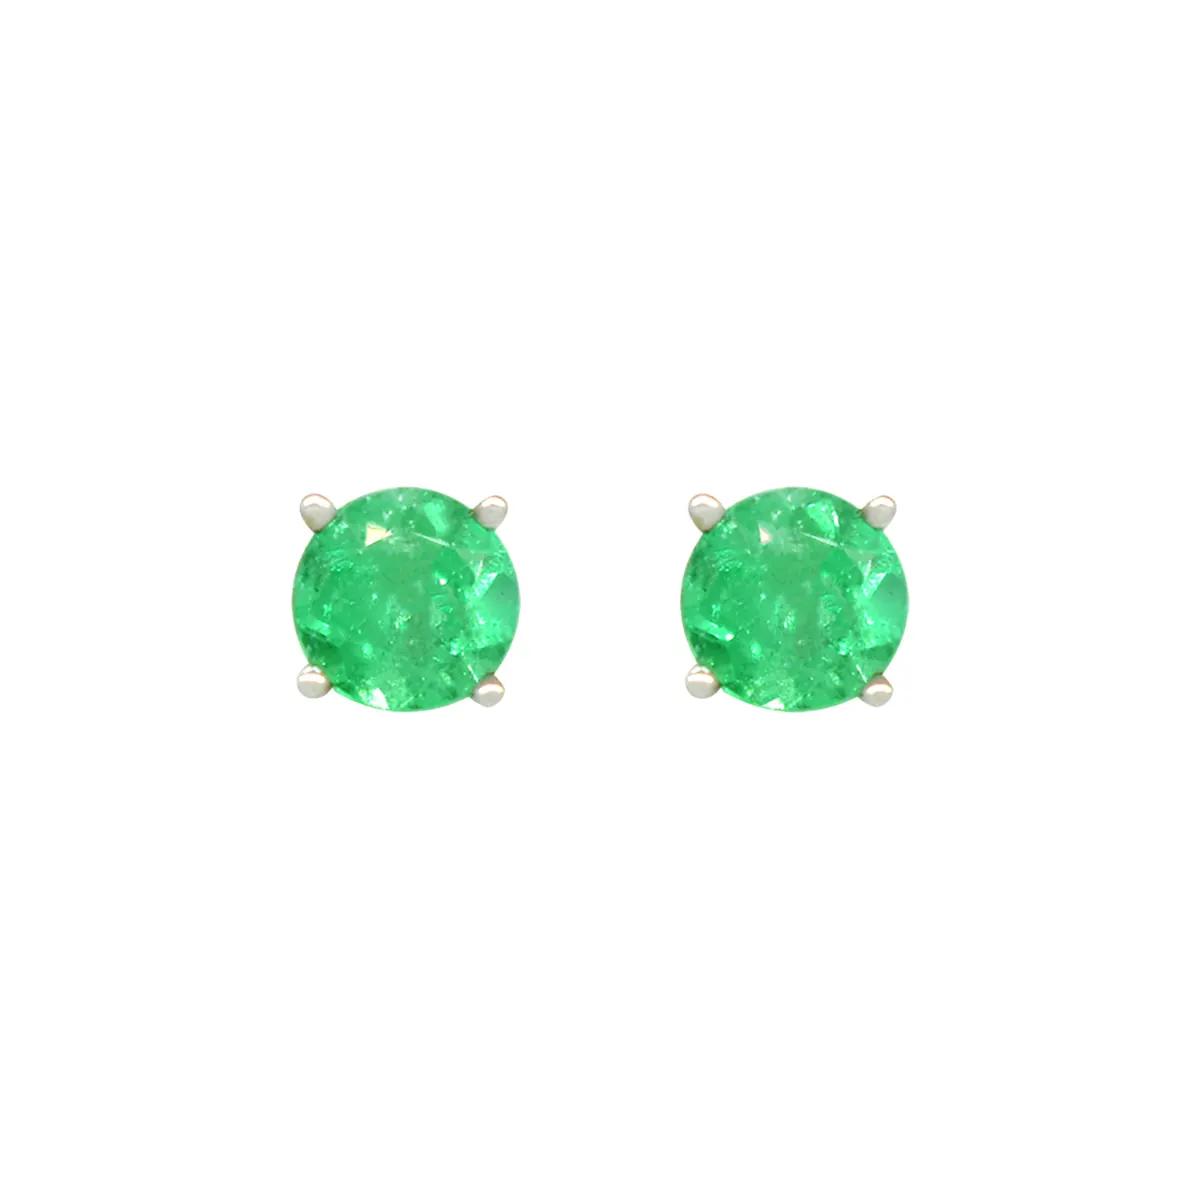 emerald-stud-earrings-in-18k-white-gold-classic-prong-setting